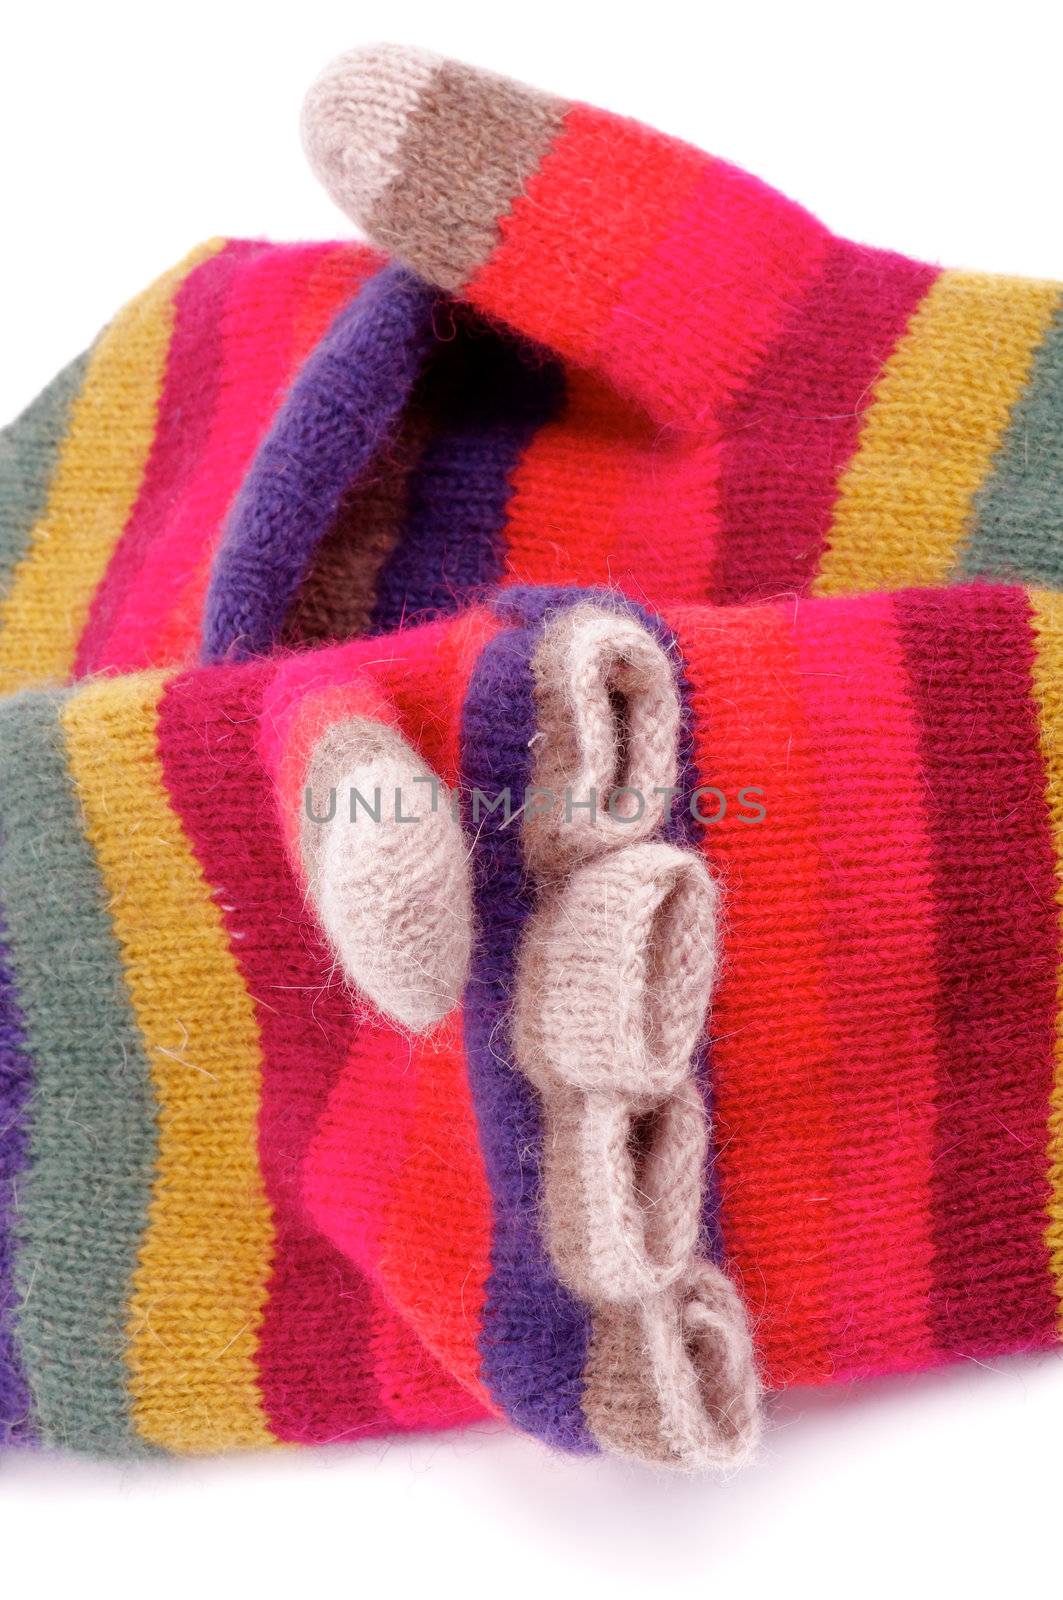 Striped Colourful Gloves with Fingers closeup on white background